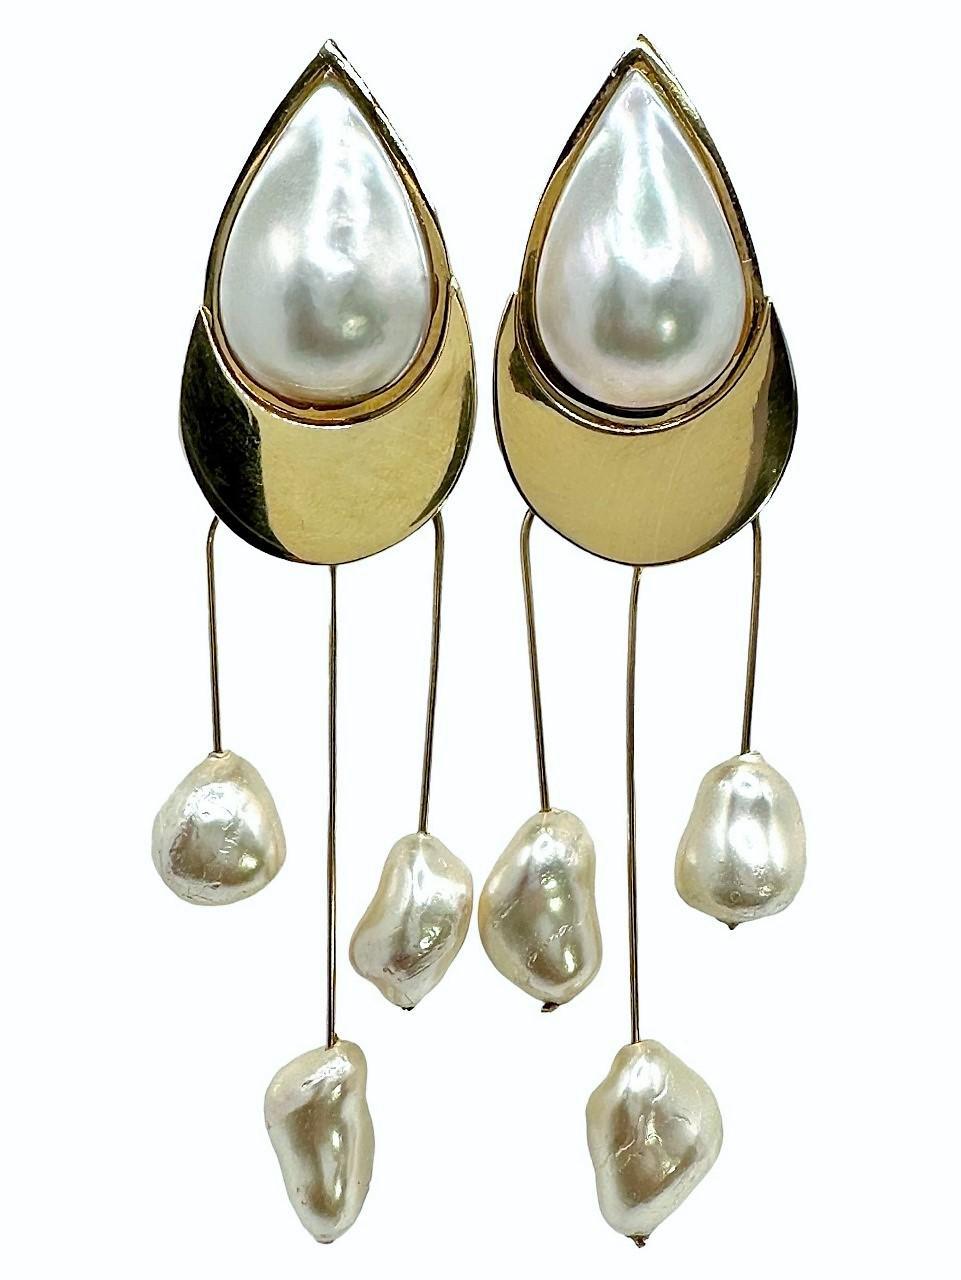 This palpable pair of Artisan created dangle earrings are crafted in 14k yellow gold and measure an impressive 4 inches long by 1 inch wide. Two large pear shape mabe pearls are expertly bezel set into the top plate. Long dangles extend from the top